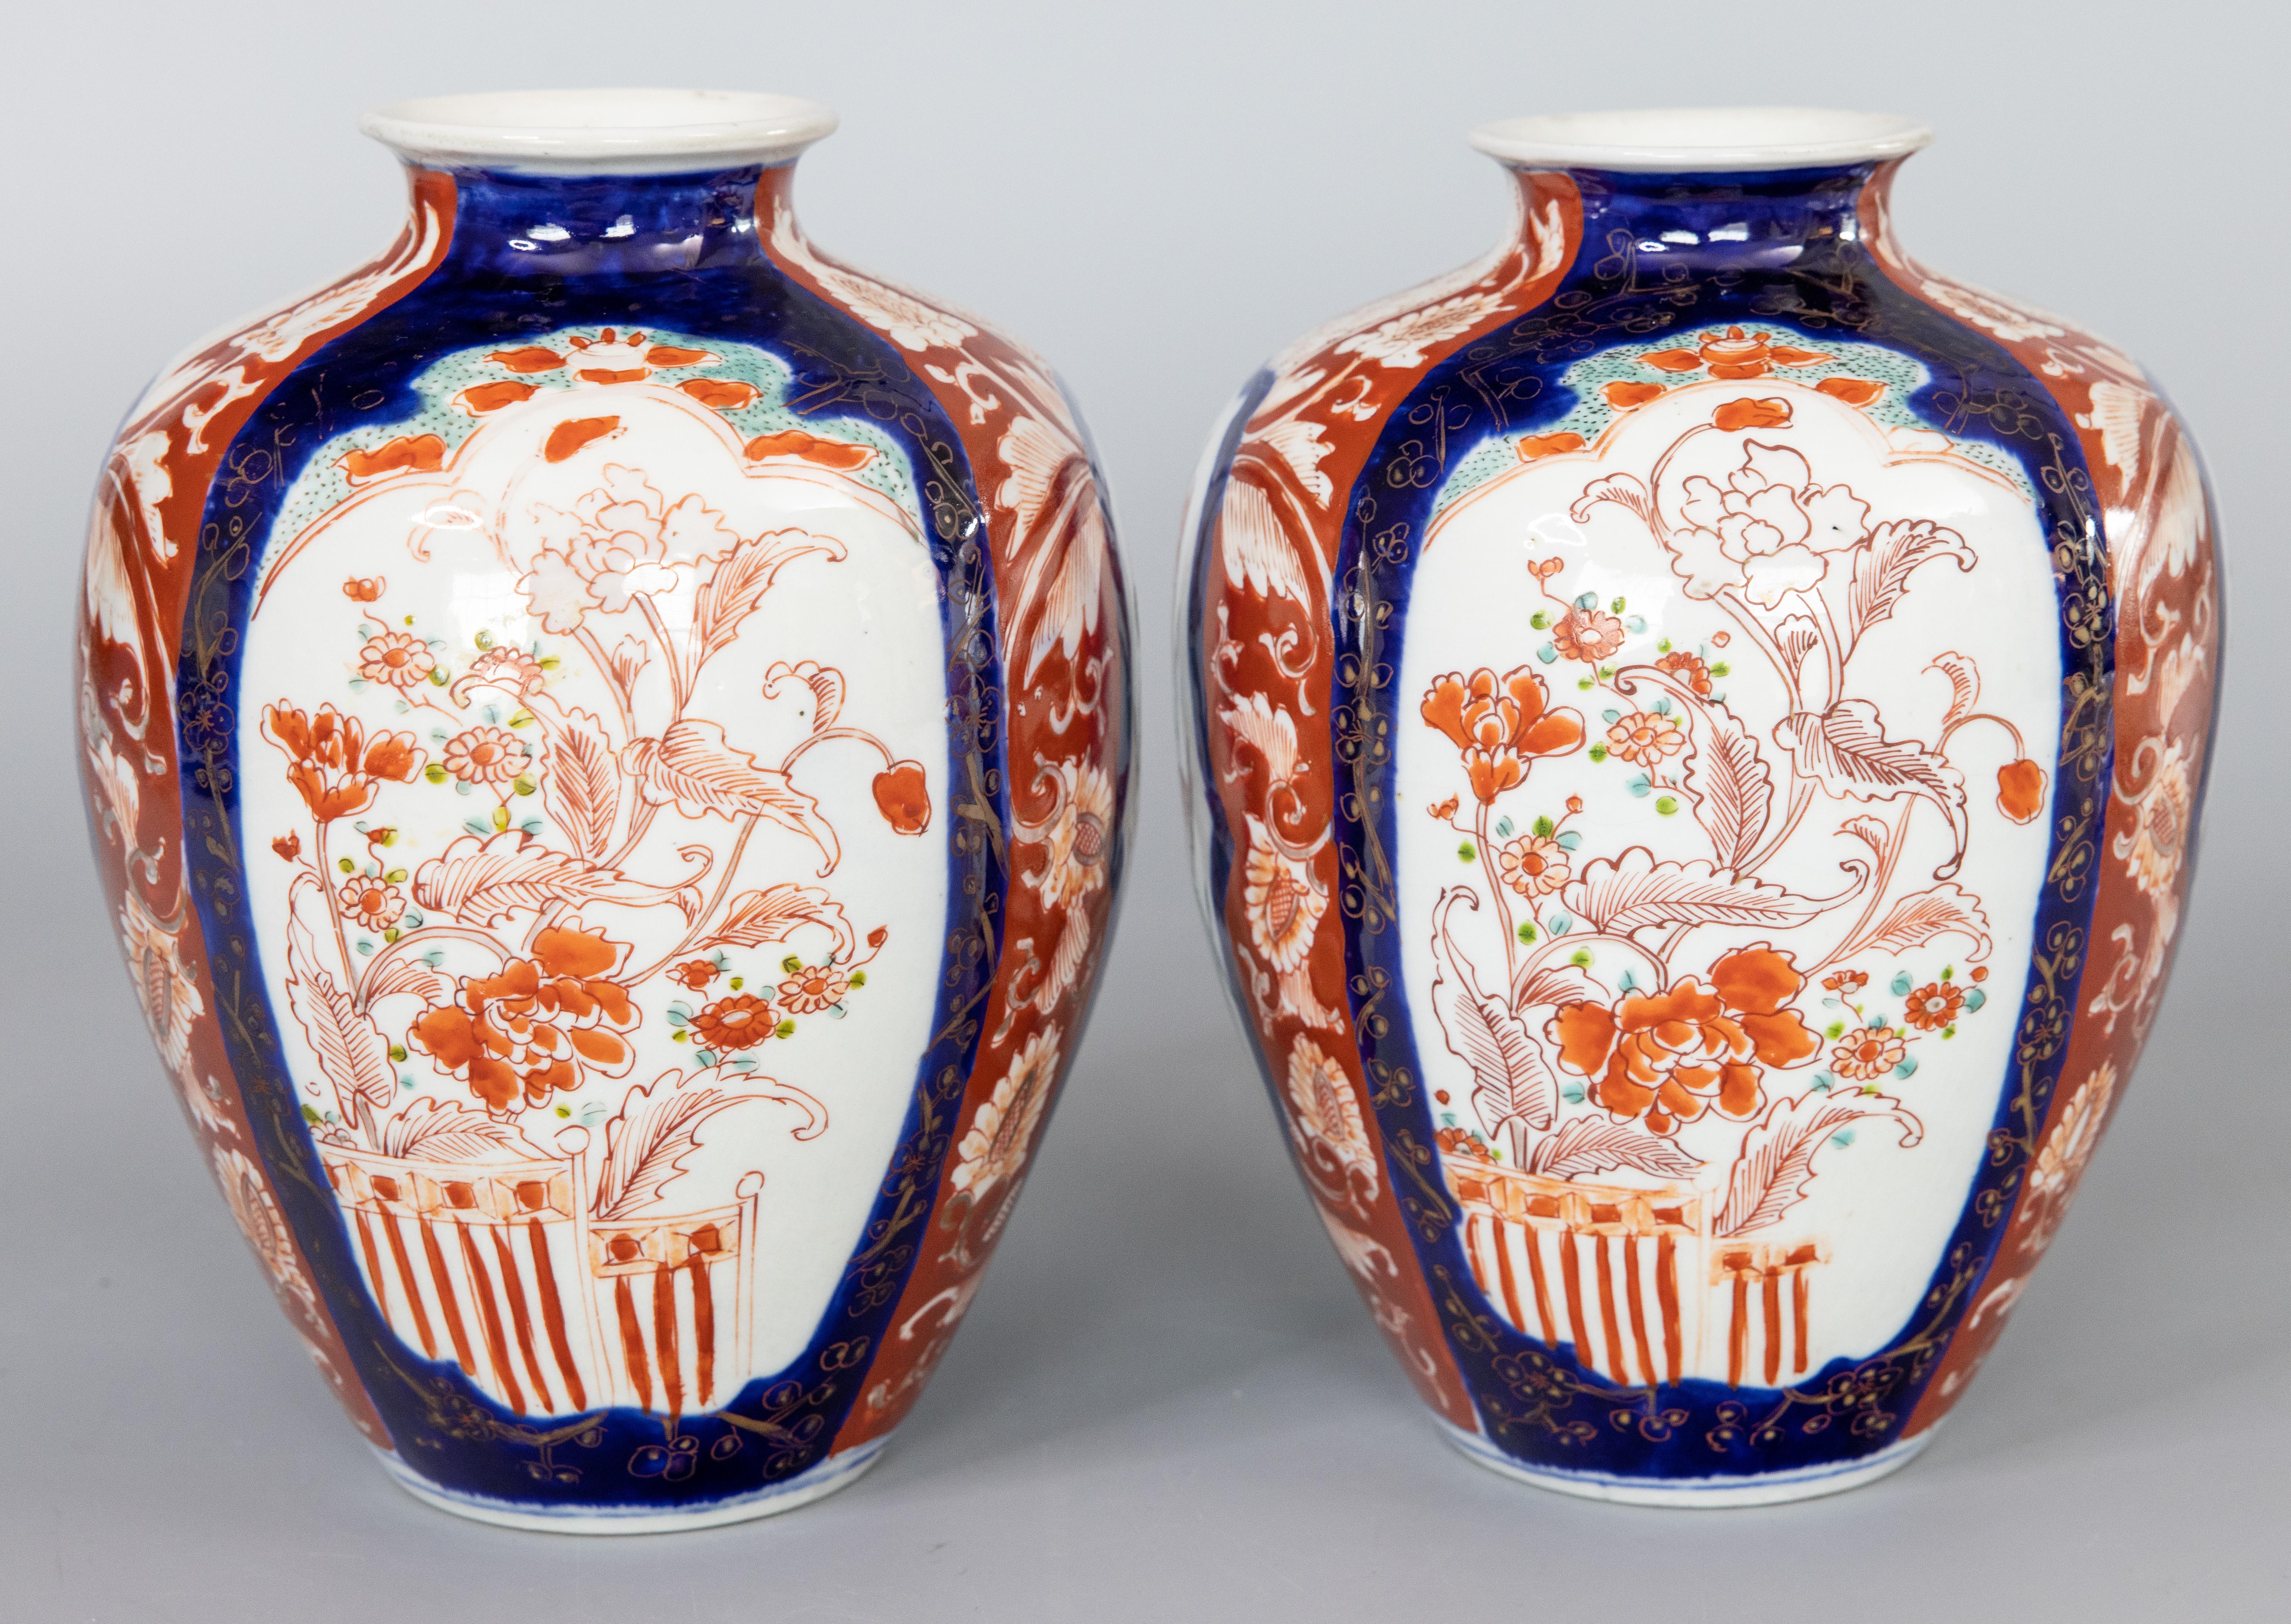 A gorgeous pair of 19th-Century Japanese Imari porcelain vases. These fine vases have a lovely shape and hand painted floral design in the traditional Imari colors. They are in beautiful antique condition and would be fabulous for